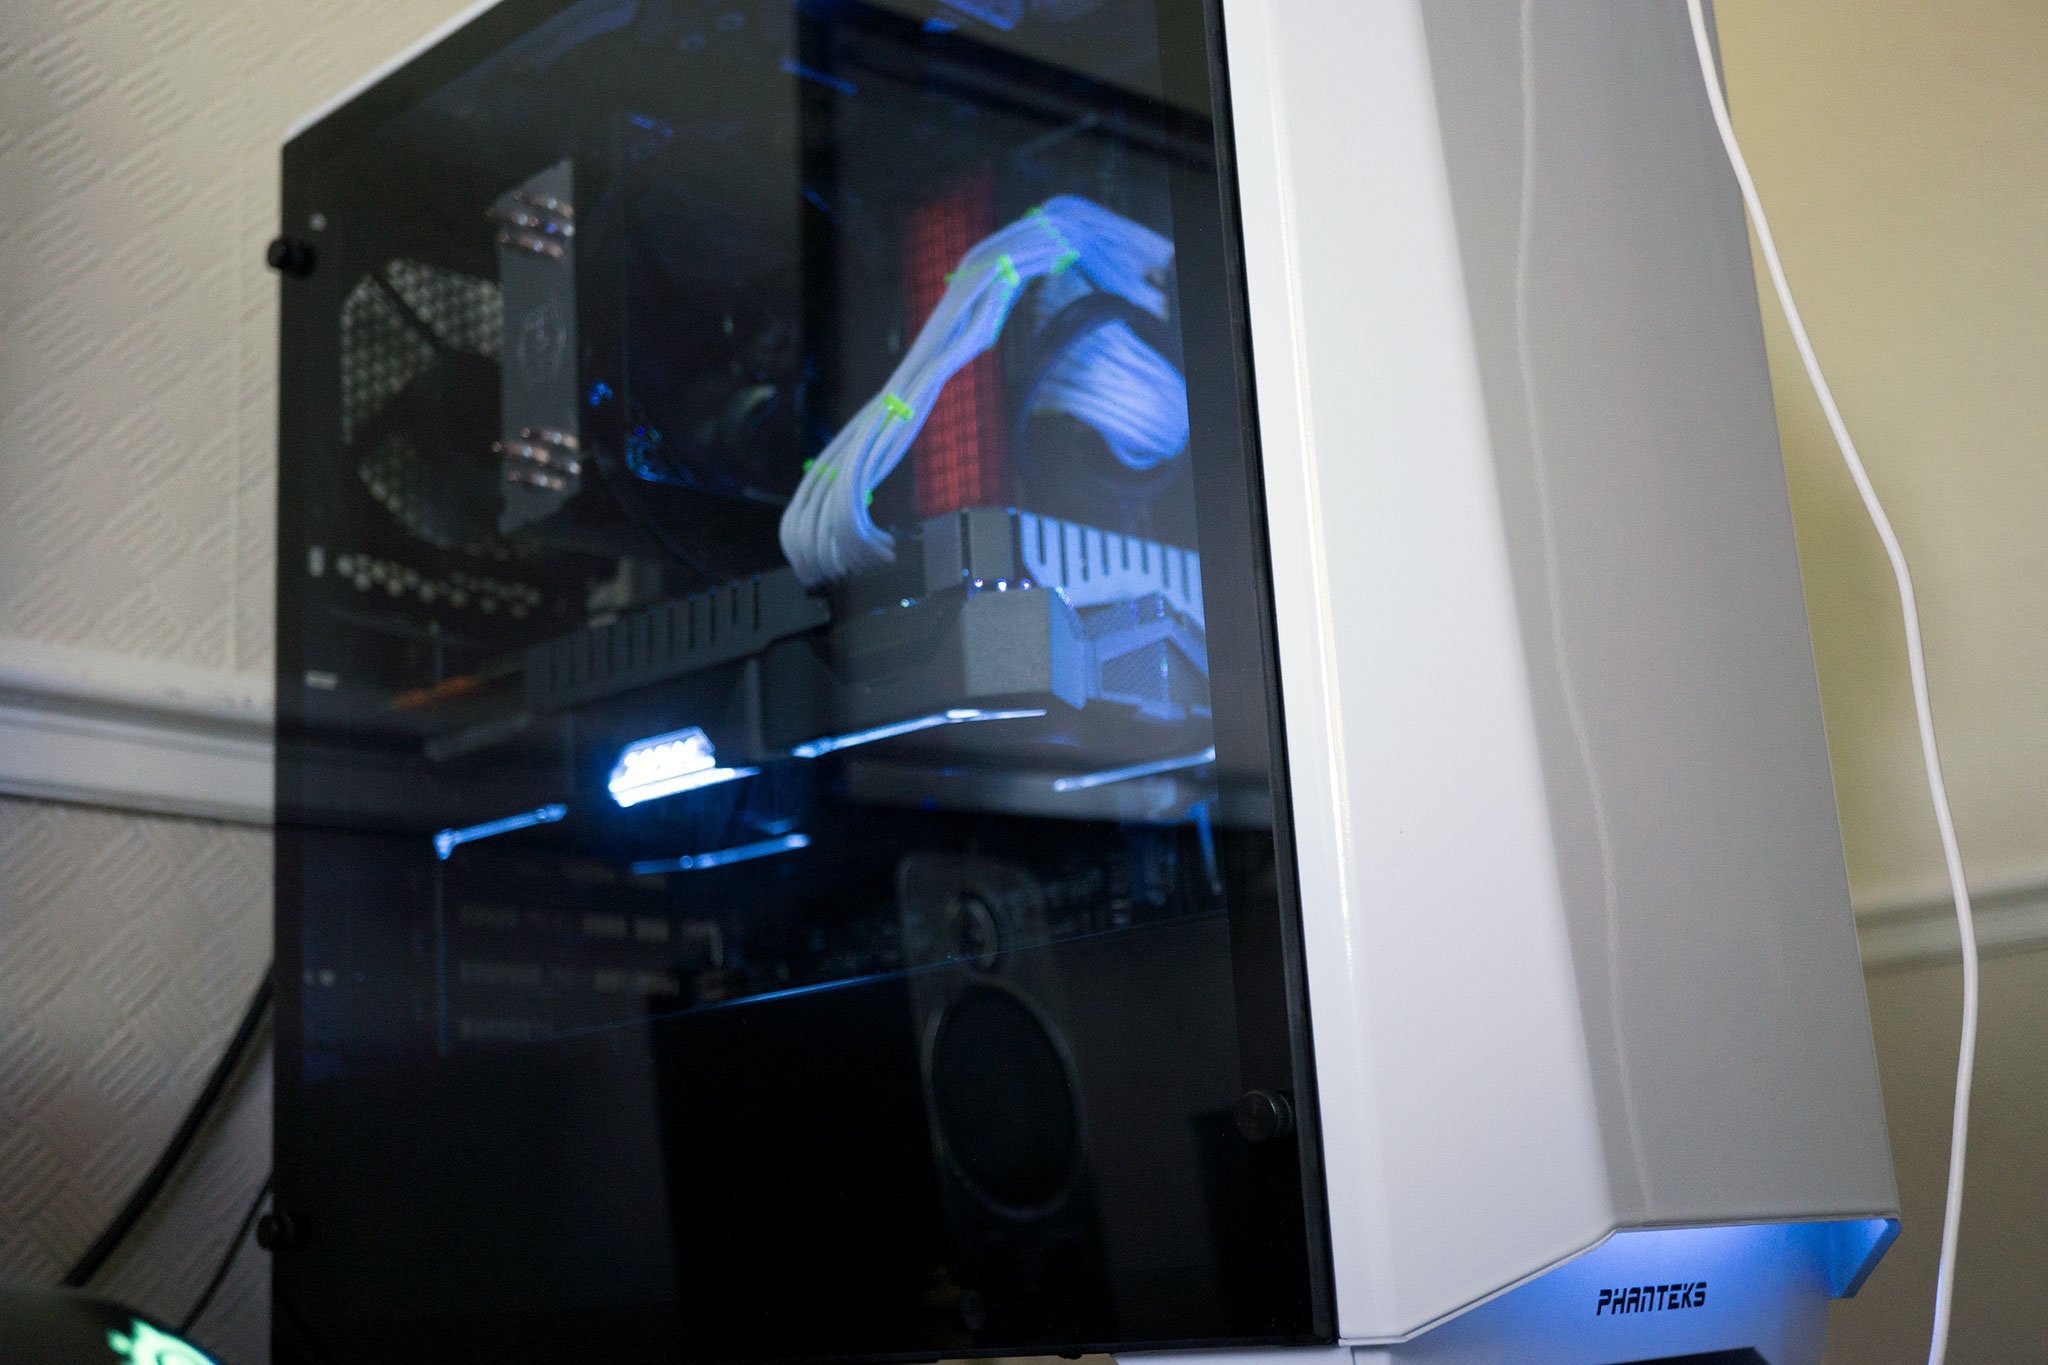 Phanteks P350X review: Quality, tempered glass and RGB at a great price